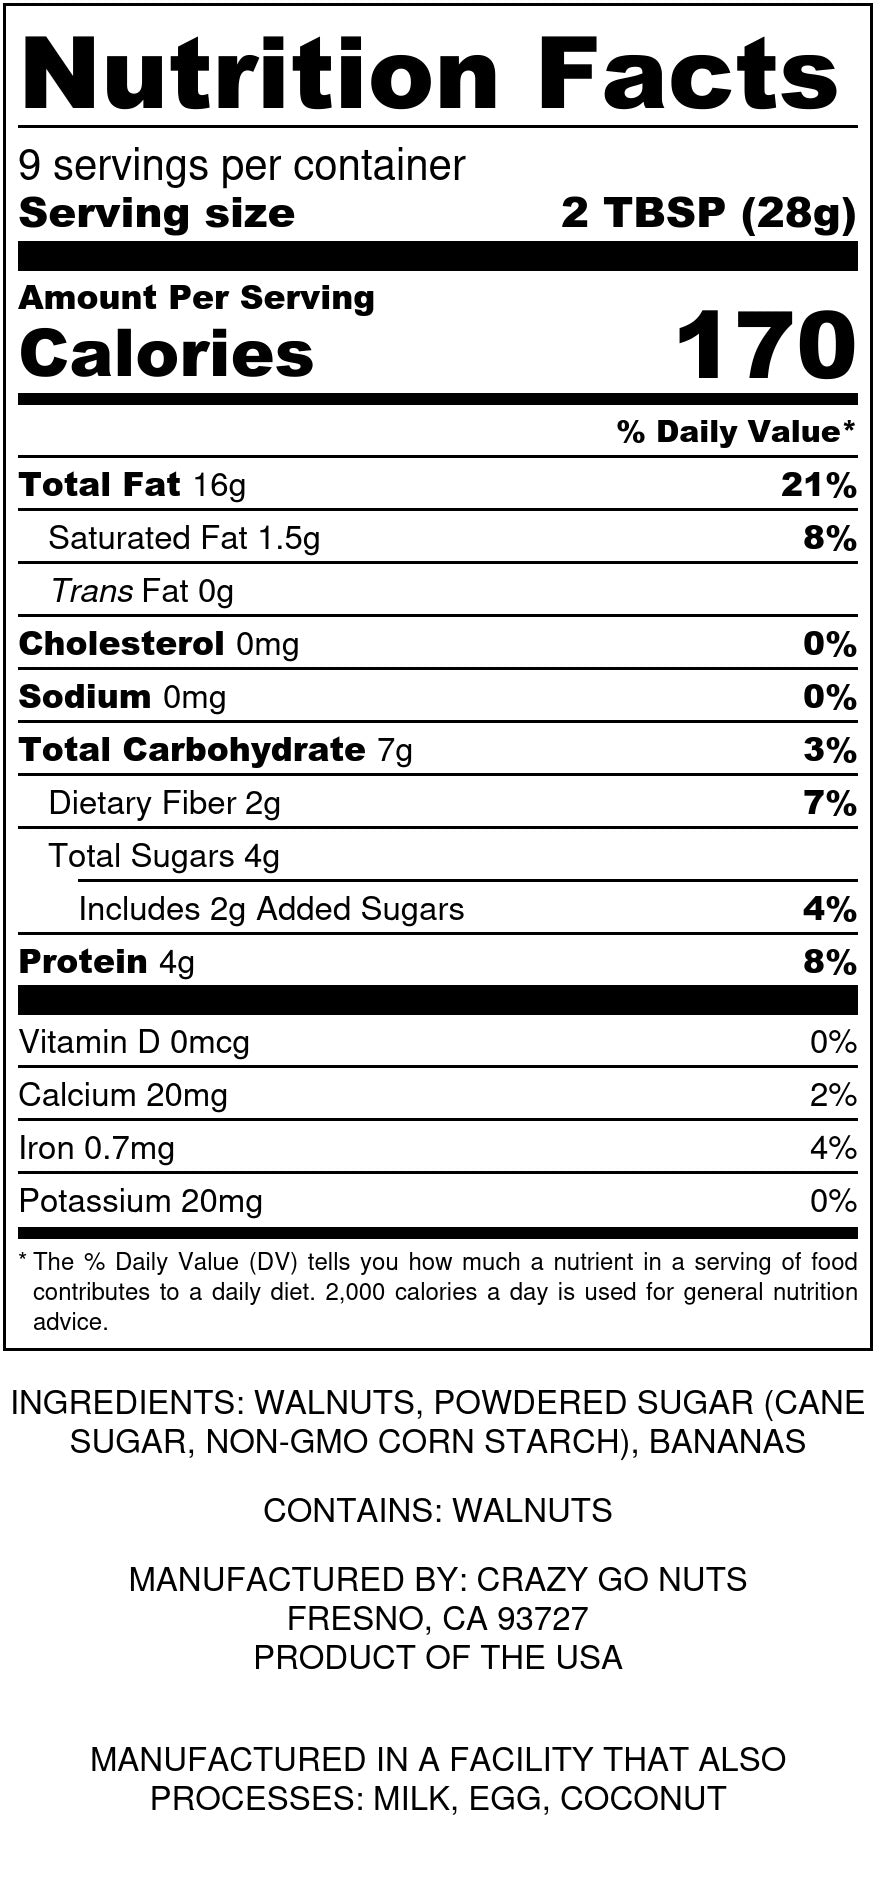 Nutrition panel for banana walnut butter. Ingredients include walnuts, powdered sugar, and bananas.